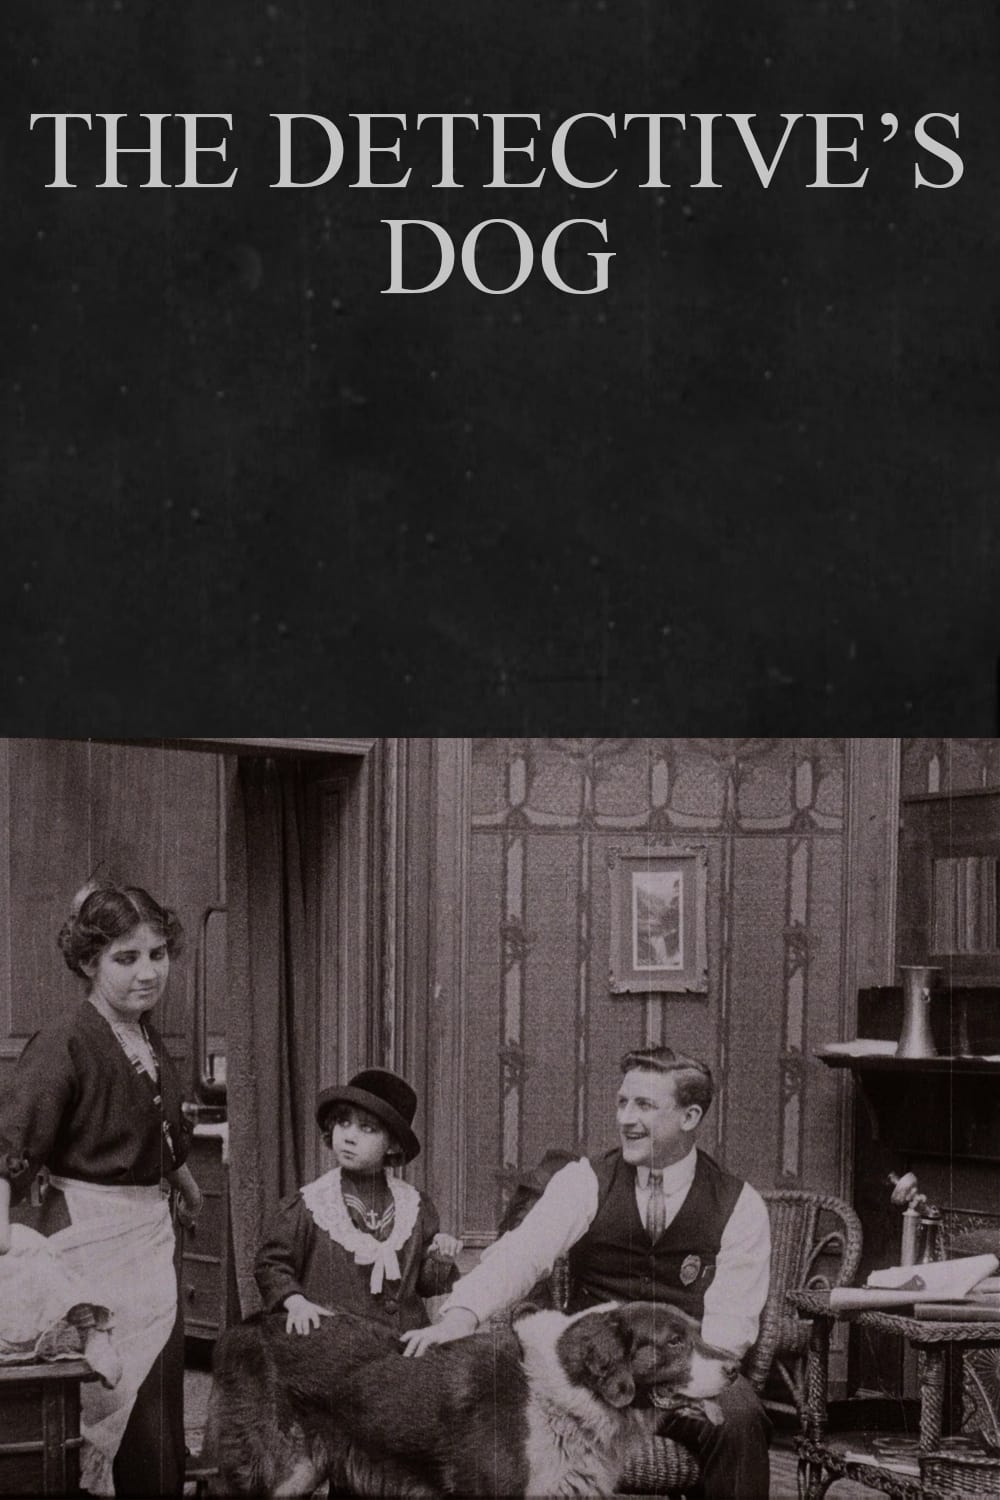 The Detective's Dog